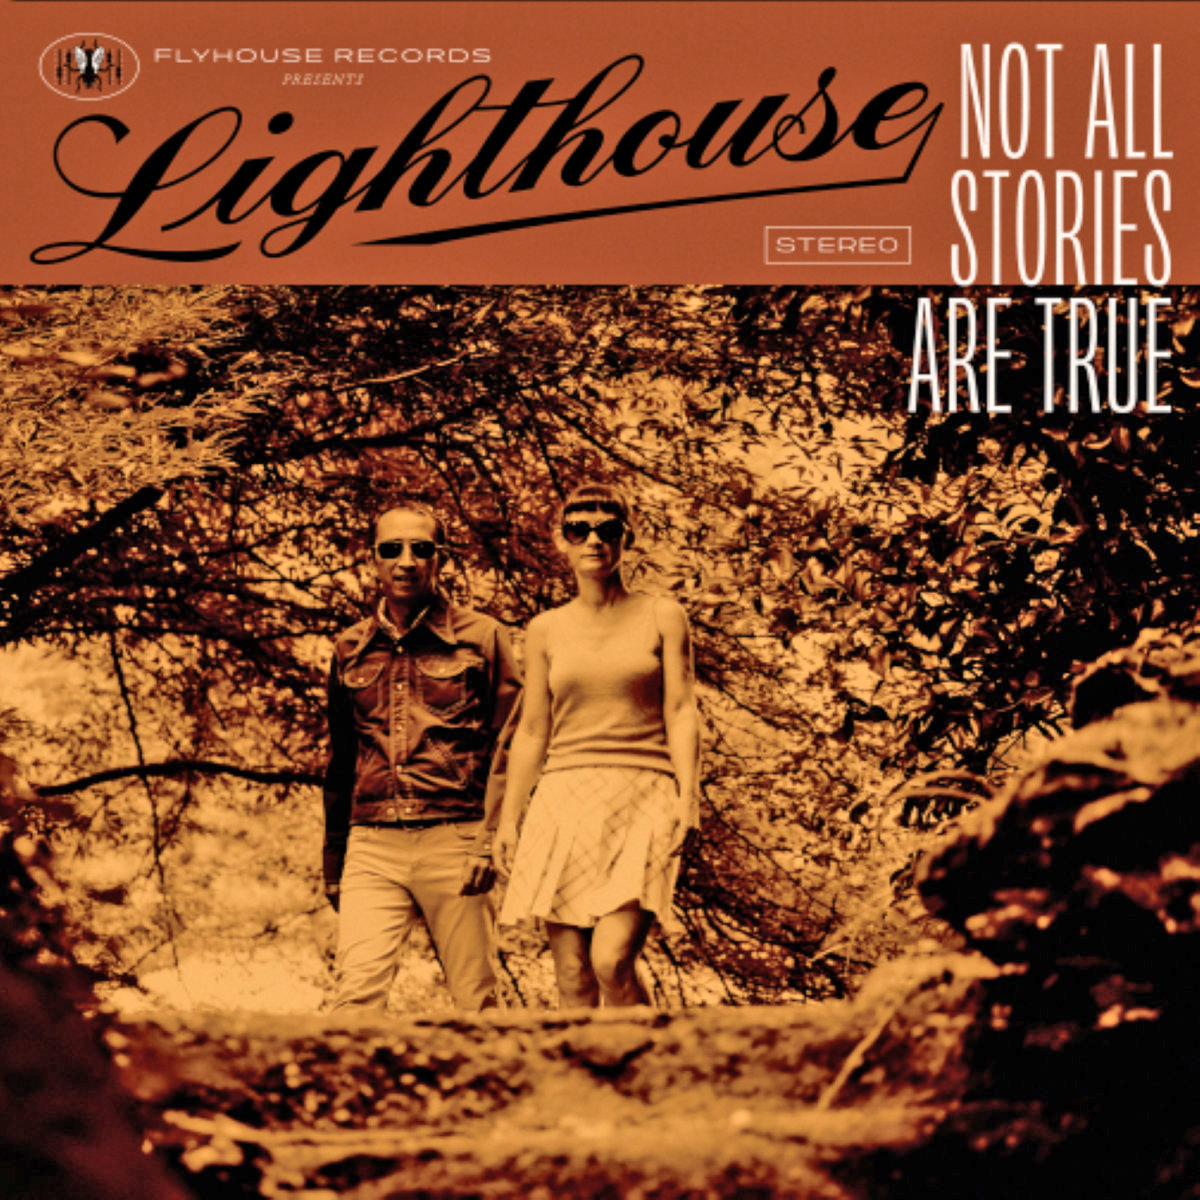 Lighthouse- Not All Stories Are True LP